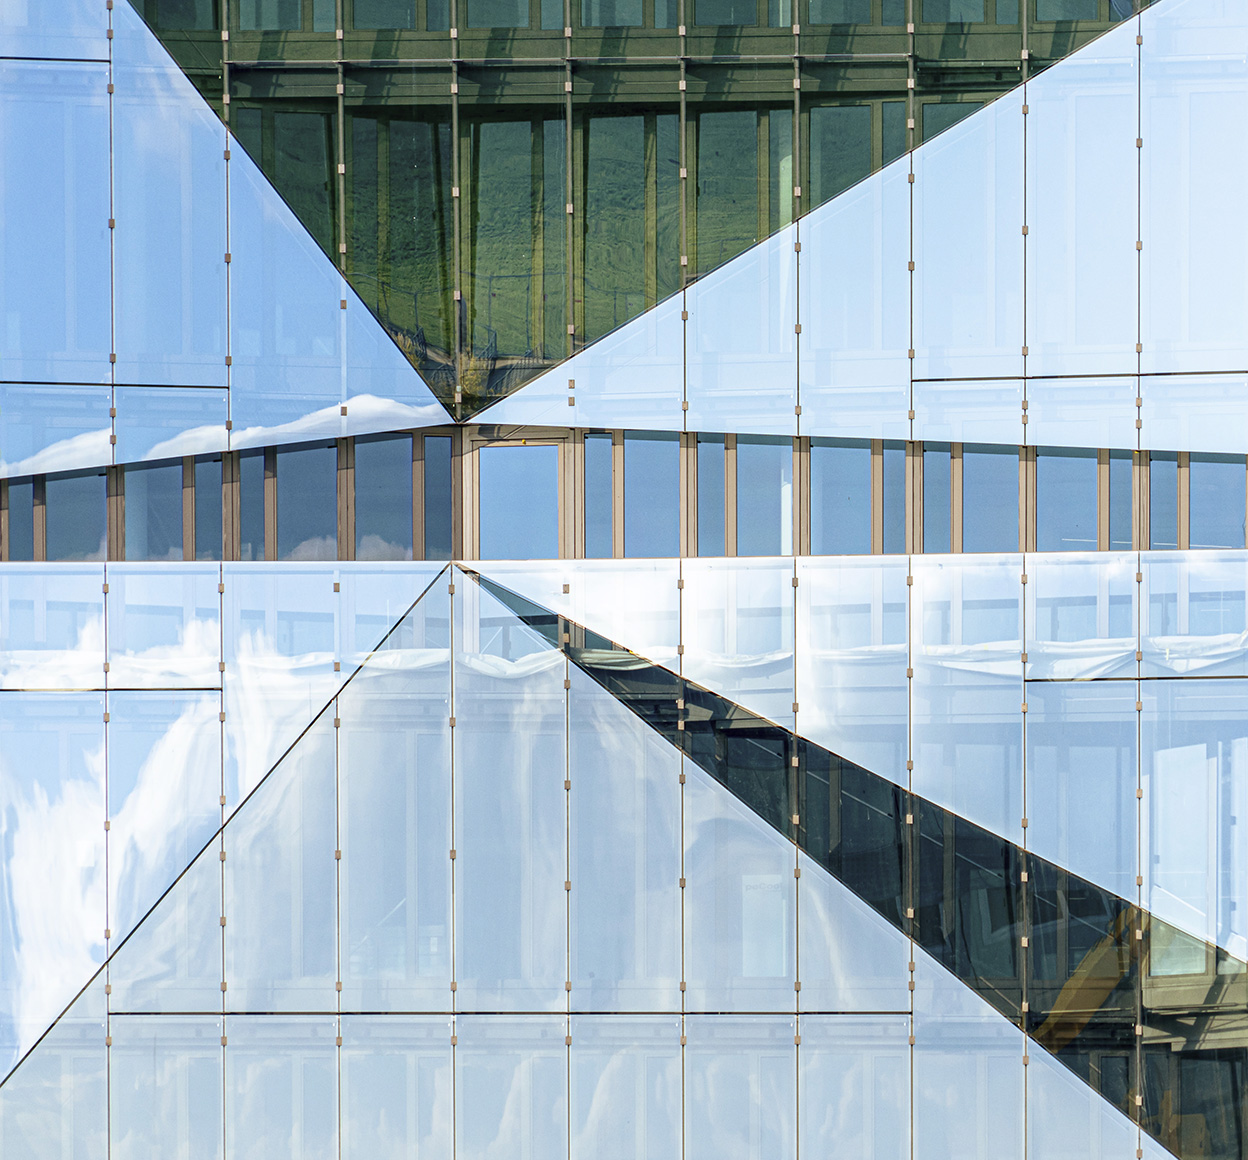 Reflection on a glass facade creates an abstract image of a neighboring office building